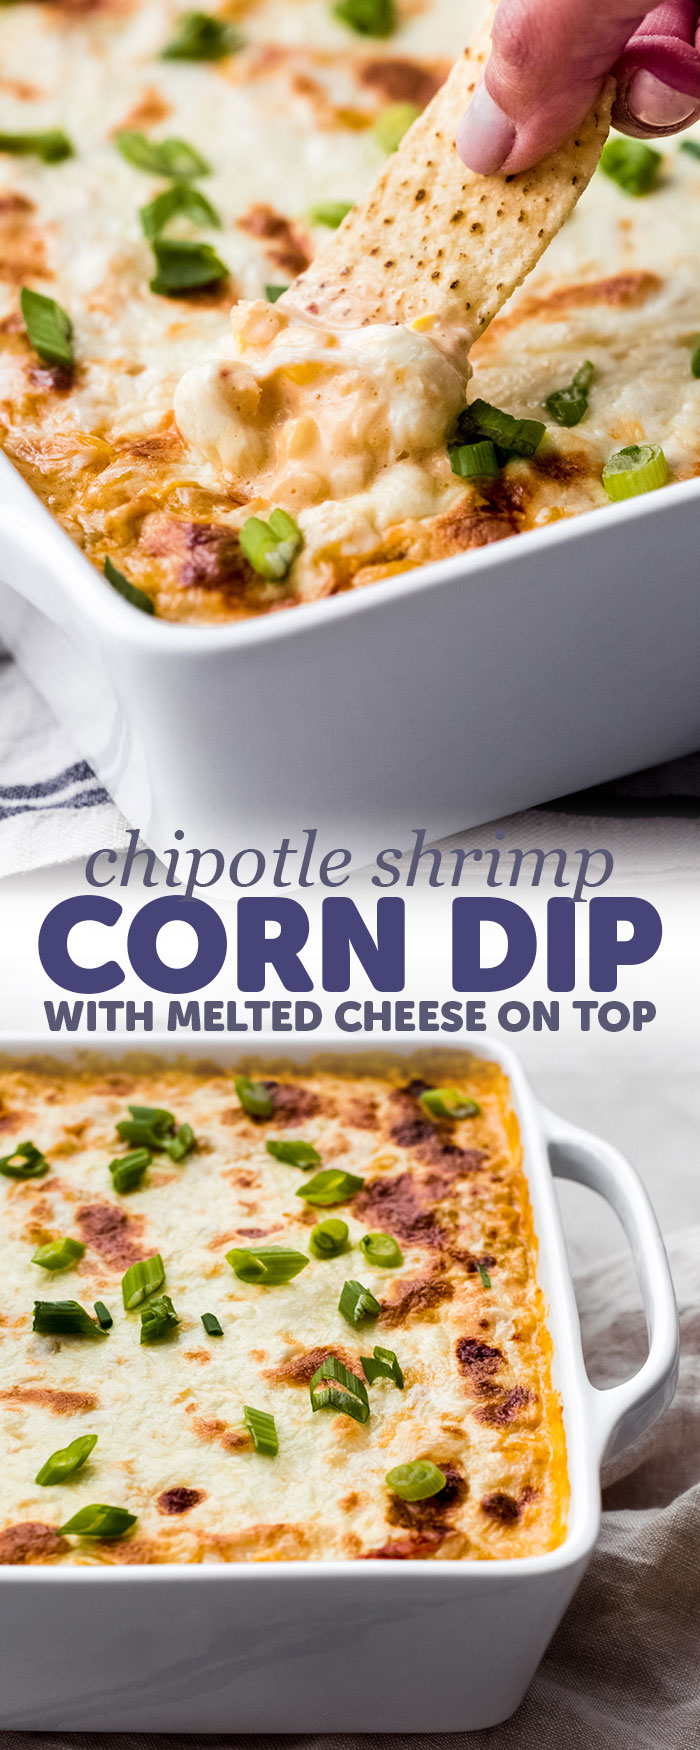 Hot Chipotle Shrimp Corn Dip - Learn how to make the most addicting chipotle spiked shrimp and corn dip! This dip is sure to have your guests asking you for the recipe! #dip #appetizers #newyearseveappetizers #thebiggame #dipideas #diprecipes | Littlespicejar.com